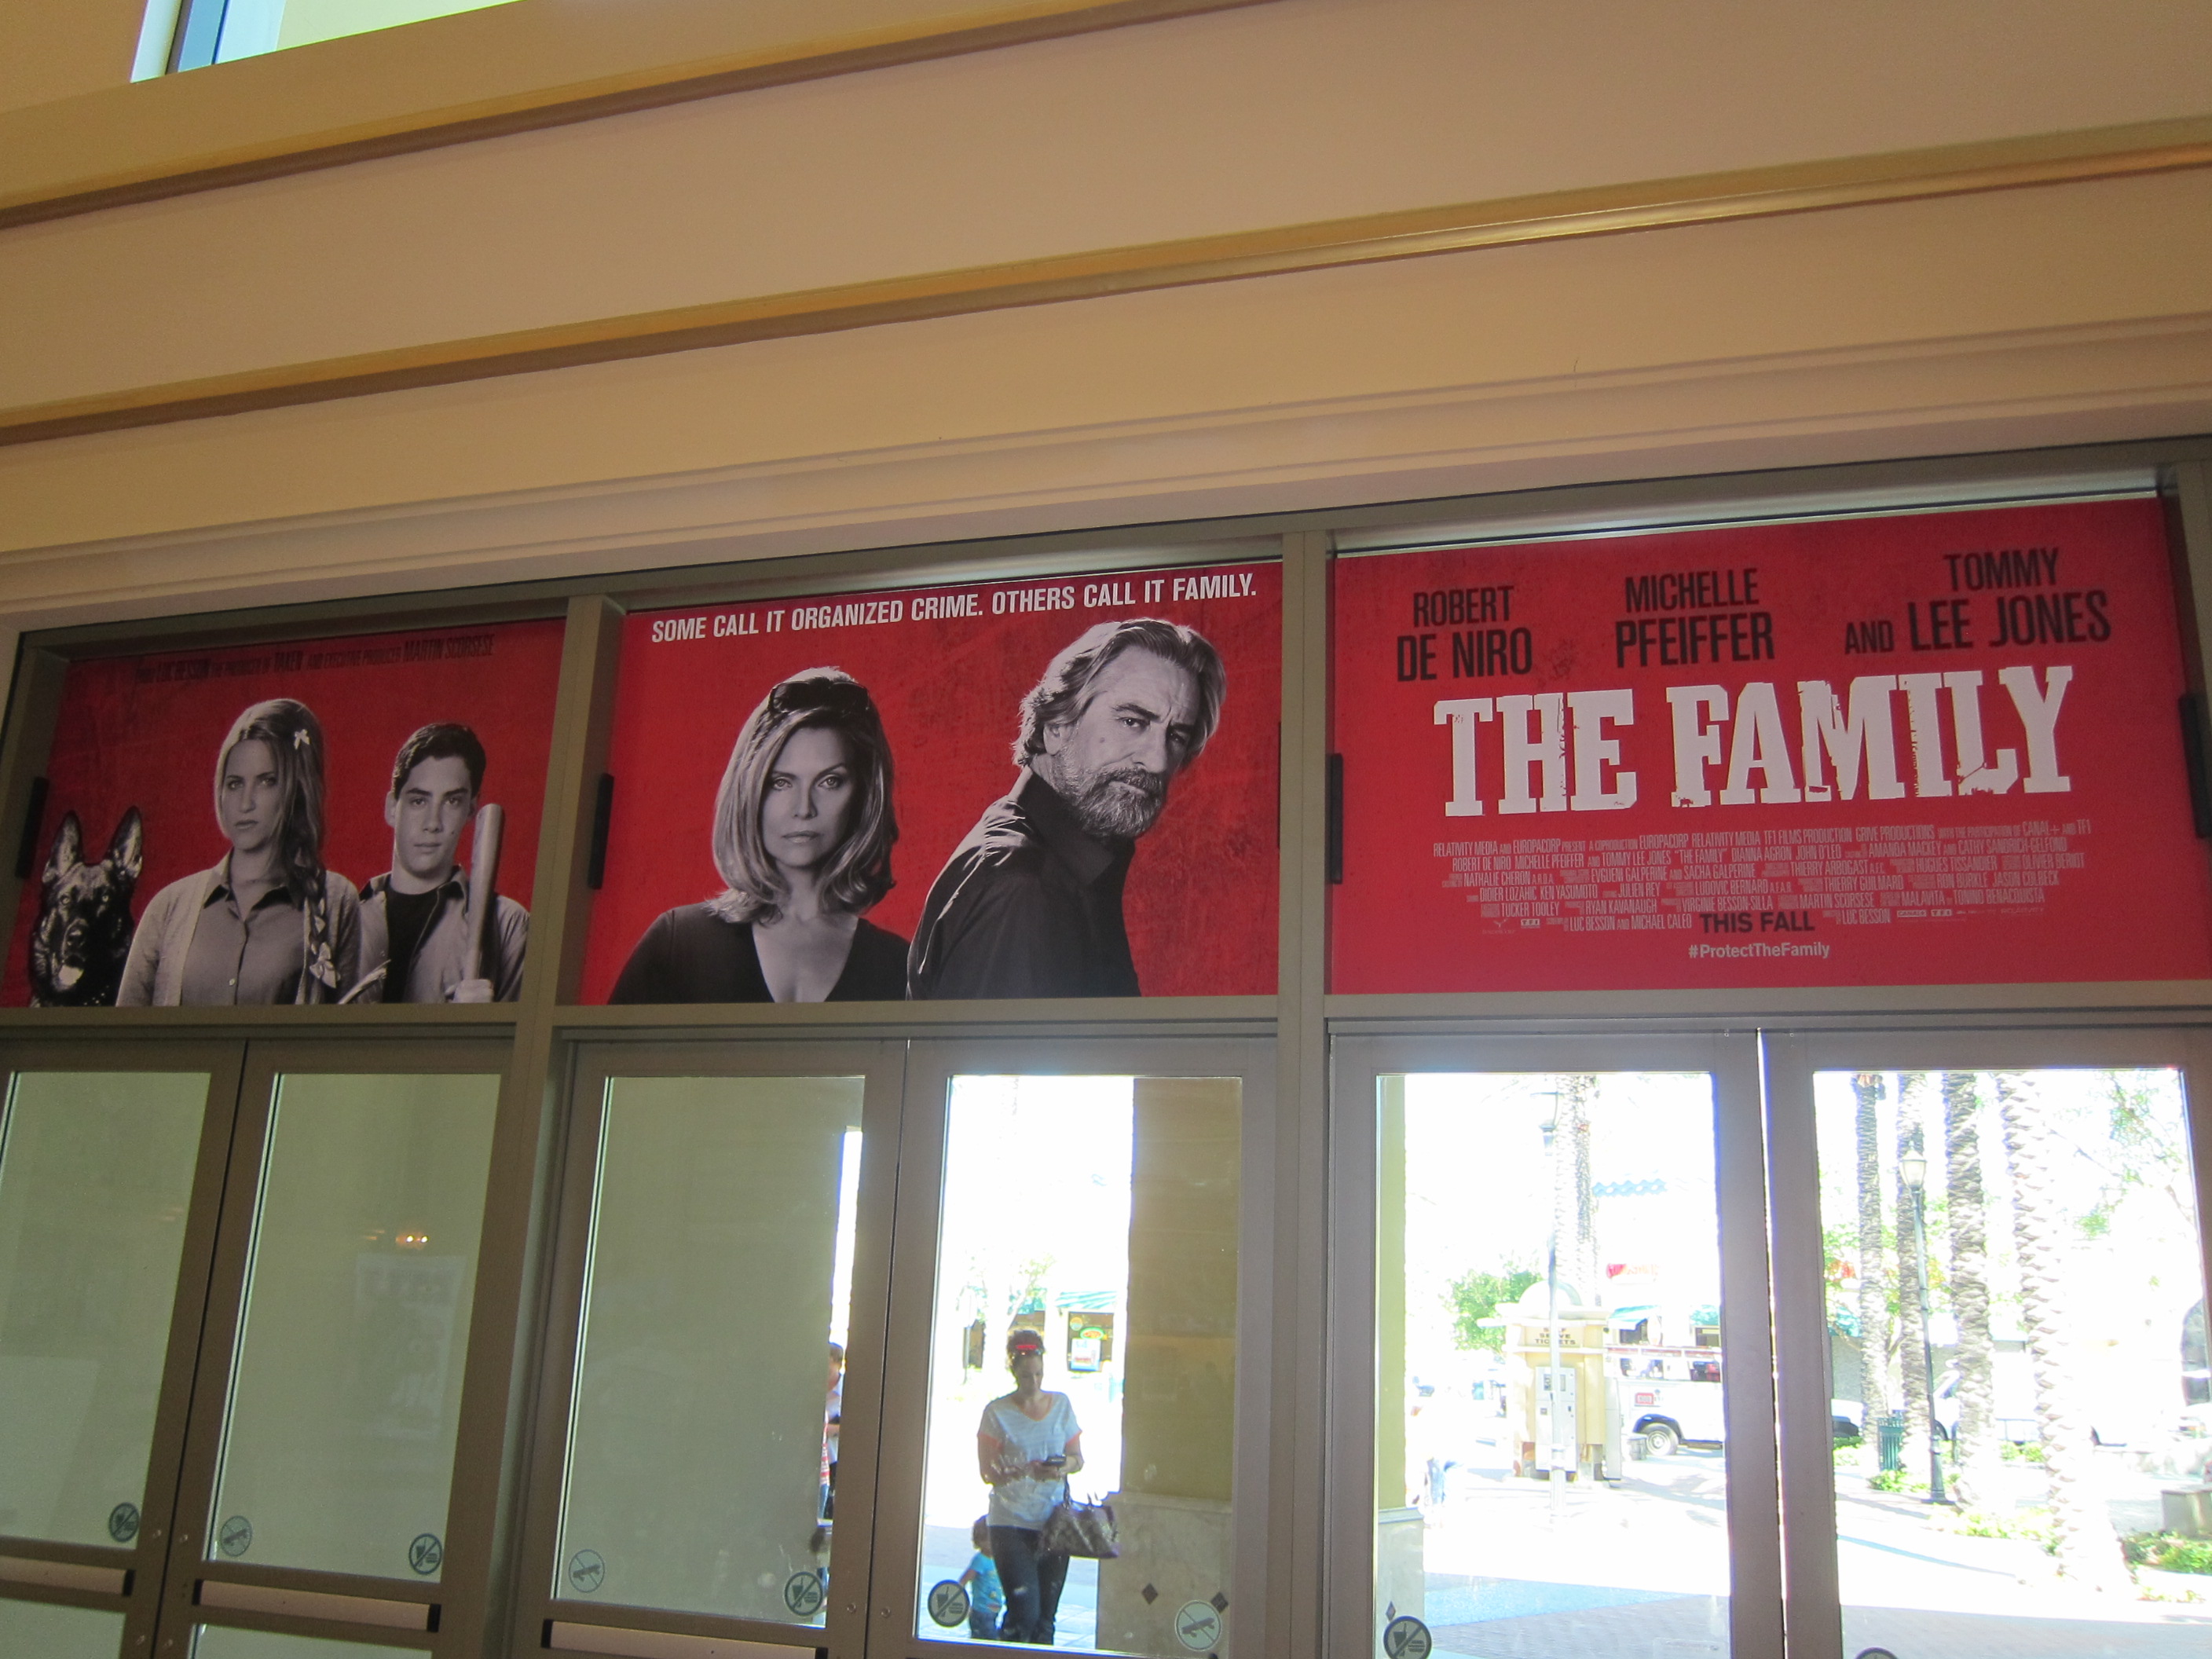 THE FAMILY above the lobby front doors of the Vista Theatre in Southern California.